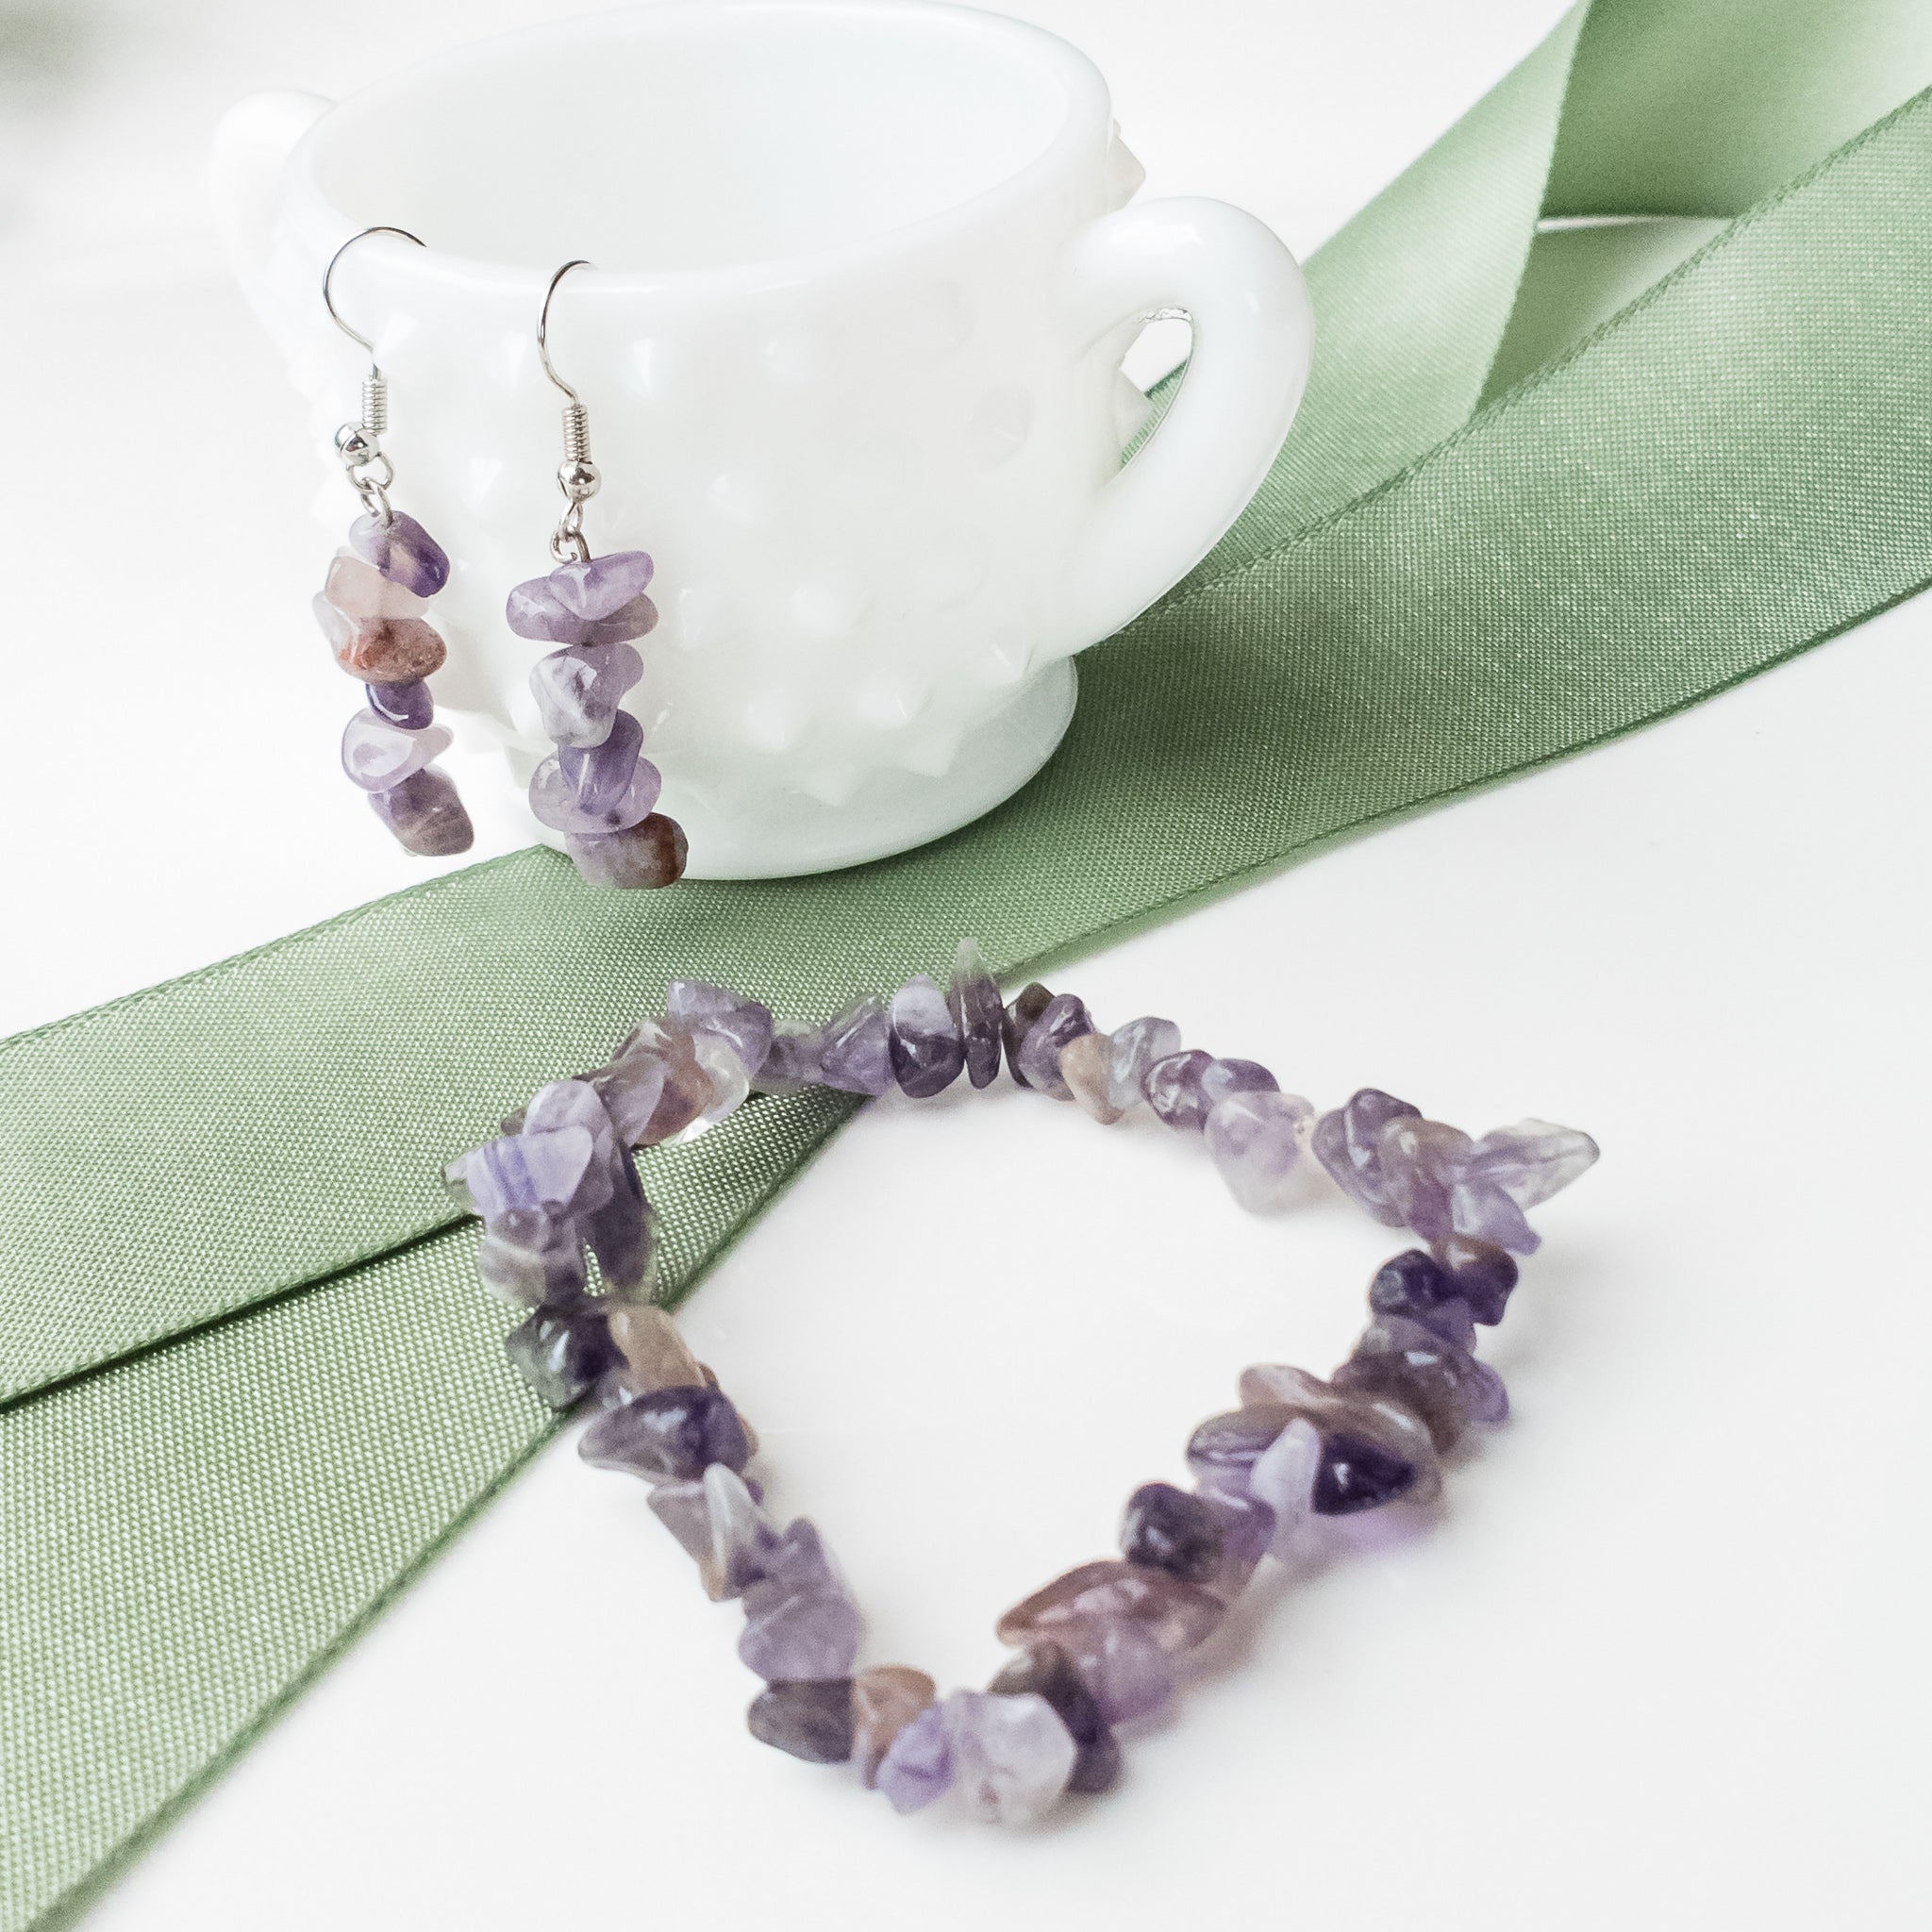 Magnolia Collection - Real Amethyst Bracelet and Matching Earrings - Close Up View - BellaChel Jeweler